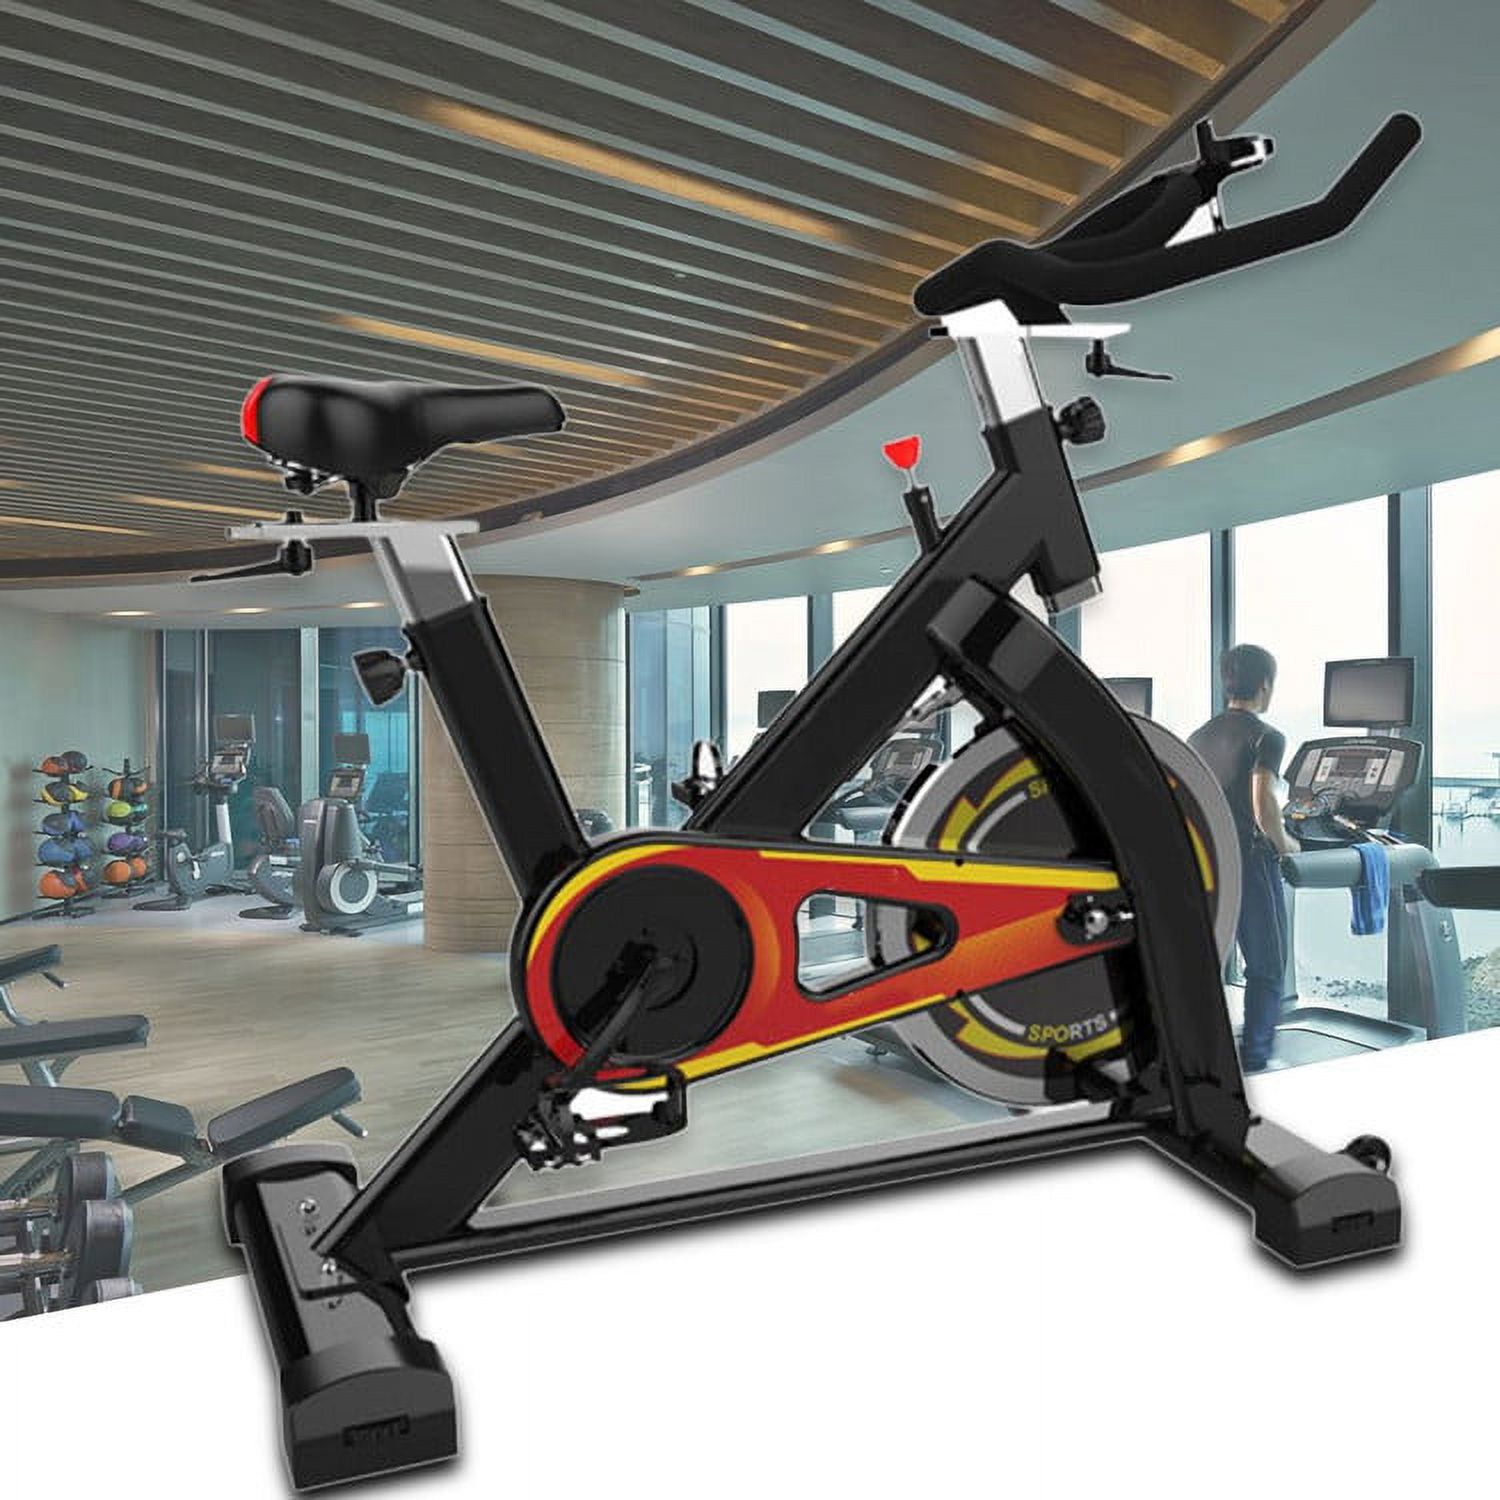 Stationary Exercise Bicycle Trainer Fitness Cardio Aerobic Exercise Bicycle Trainer S500(Black) - image 2 of 6